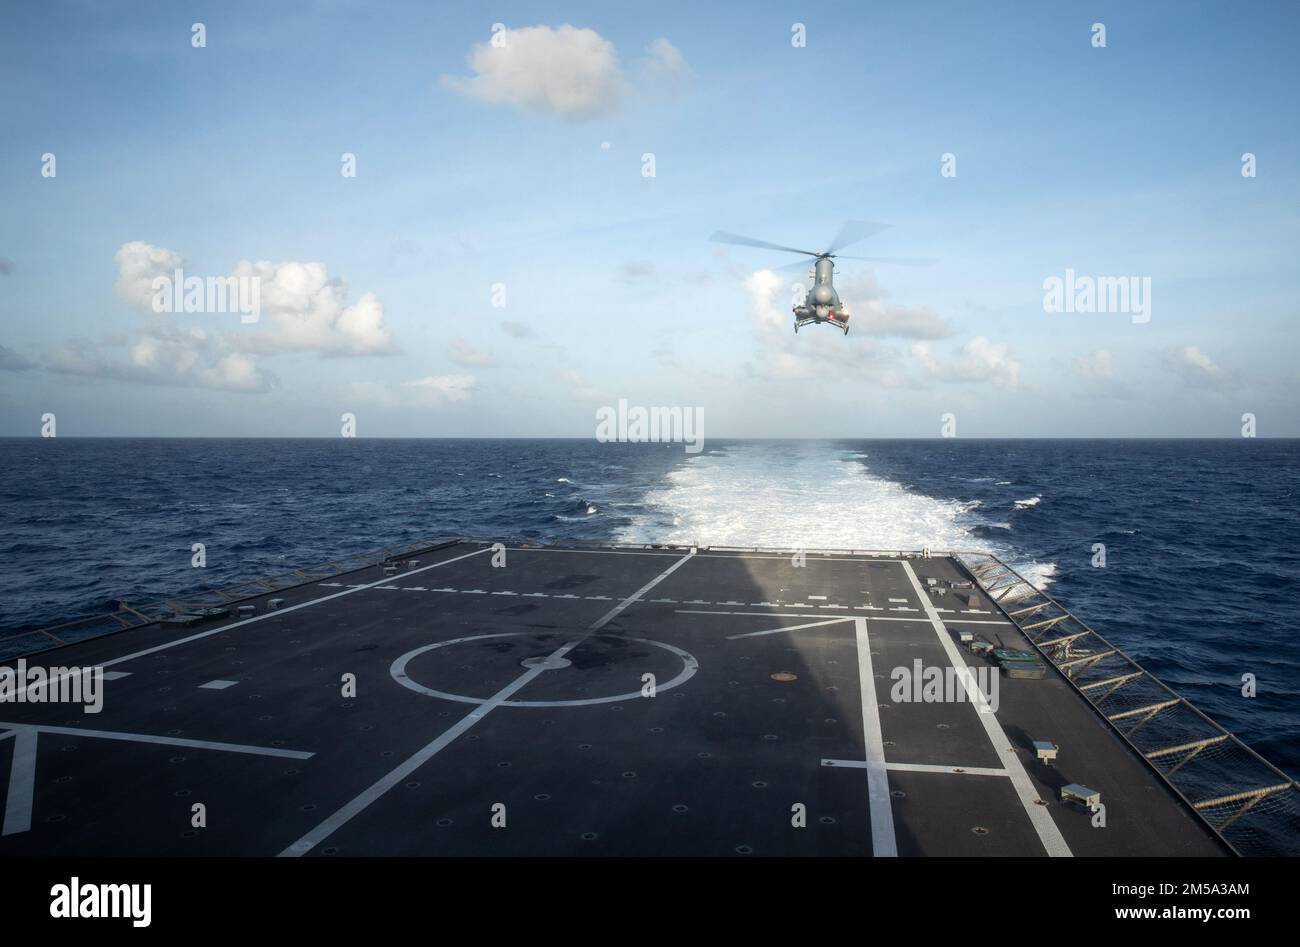 220214-N-LI768-1121  PHILIPPINE SEA (Feb. 14, 2022) – An MQ-8B Fire Scout hovers over the flight deck of the Independence-variant littoral combat ship USS Tulsa (LCS 16). Tulsa, part of Destroyer Squadron (DESRON) 7, is on a rotational deployment, operating in the U.S. 7th Fleet area of operations to enhance interoperability with partners and serve as a ready-response force in support of a free and open Indo-Pacific region. Stock Photo